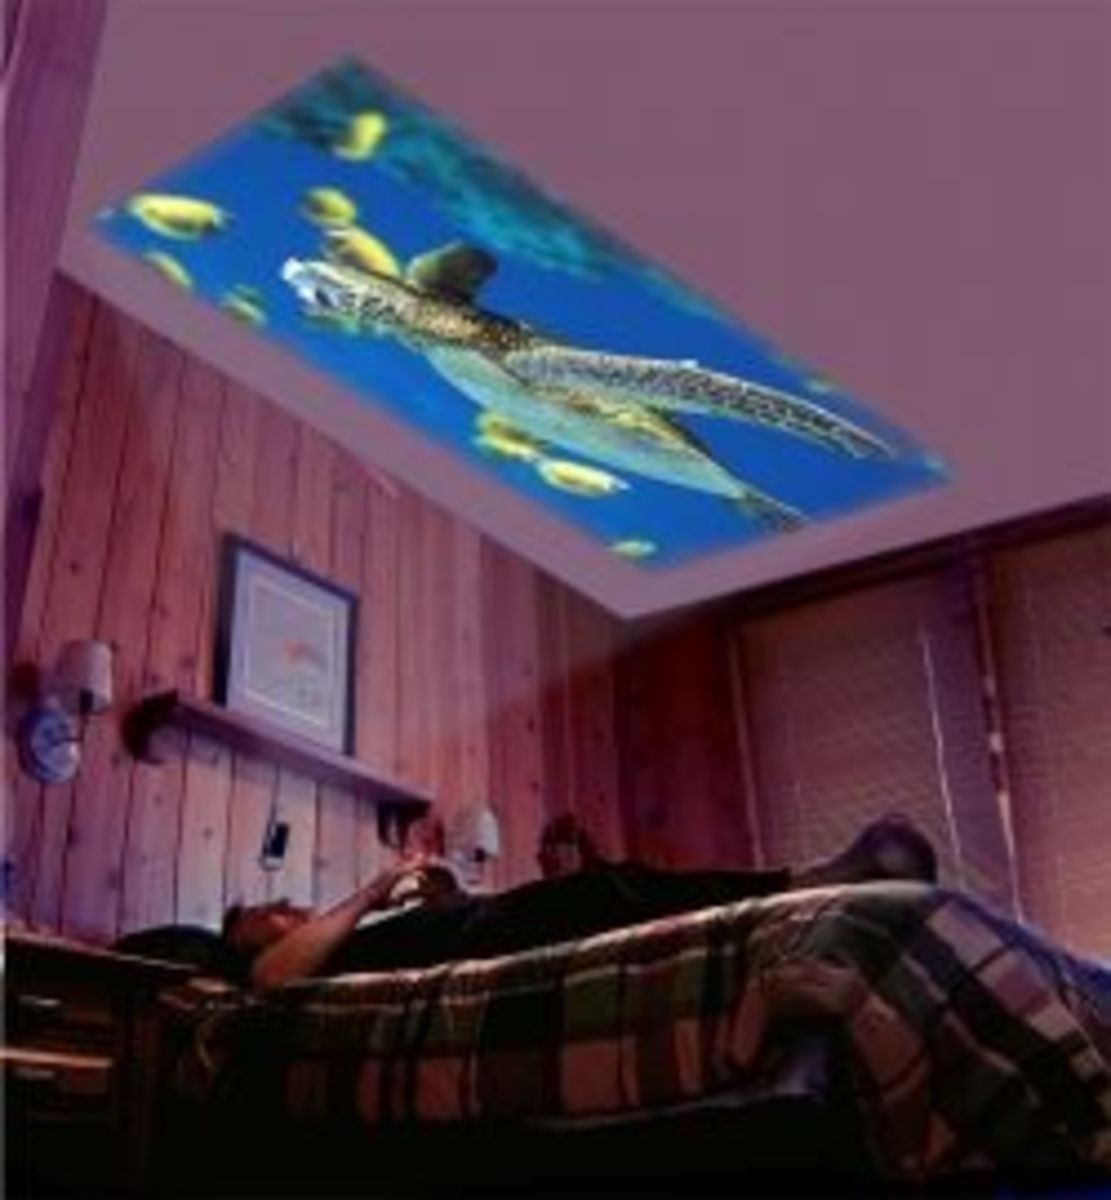 big-screen-home-theater-on-your-bedroom-ceiling-just-200